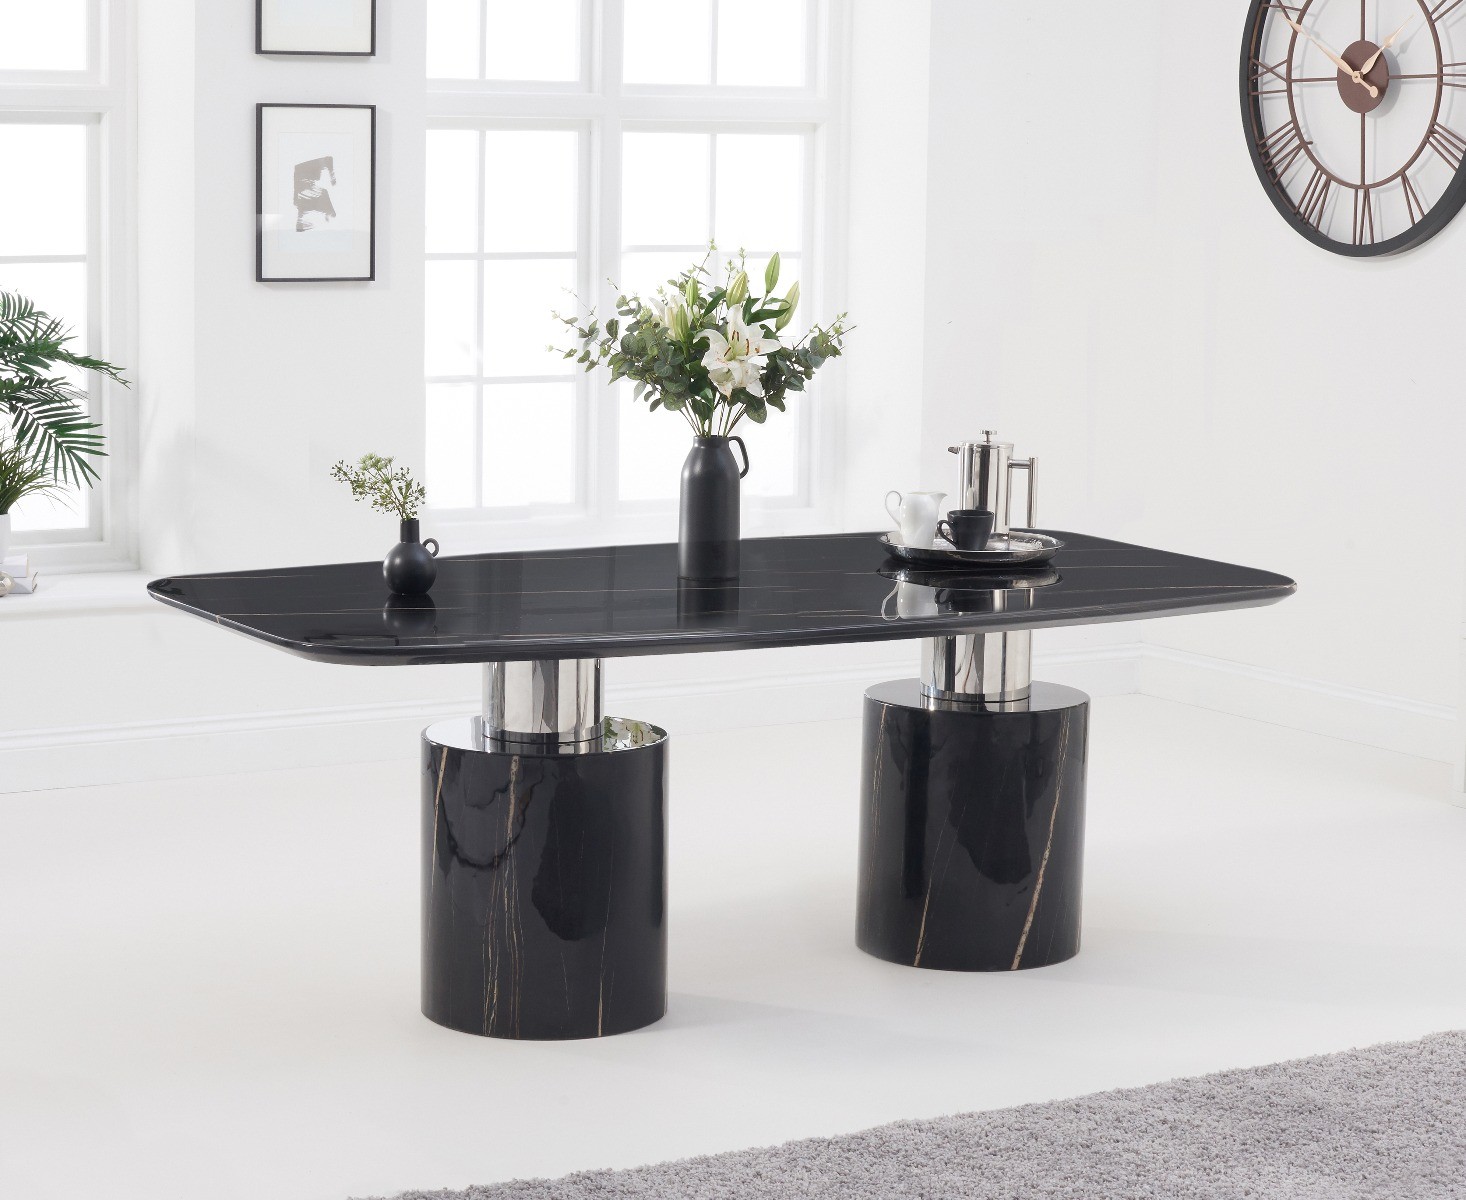 Photo 1 of Antonio 180cm black marble dining table with 6 grey aldo chairs